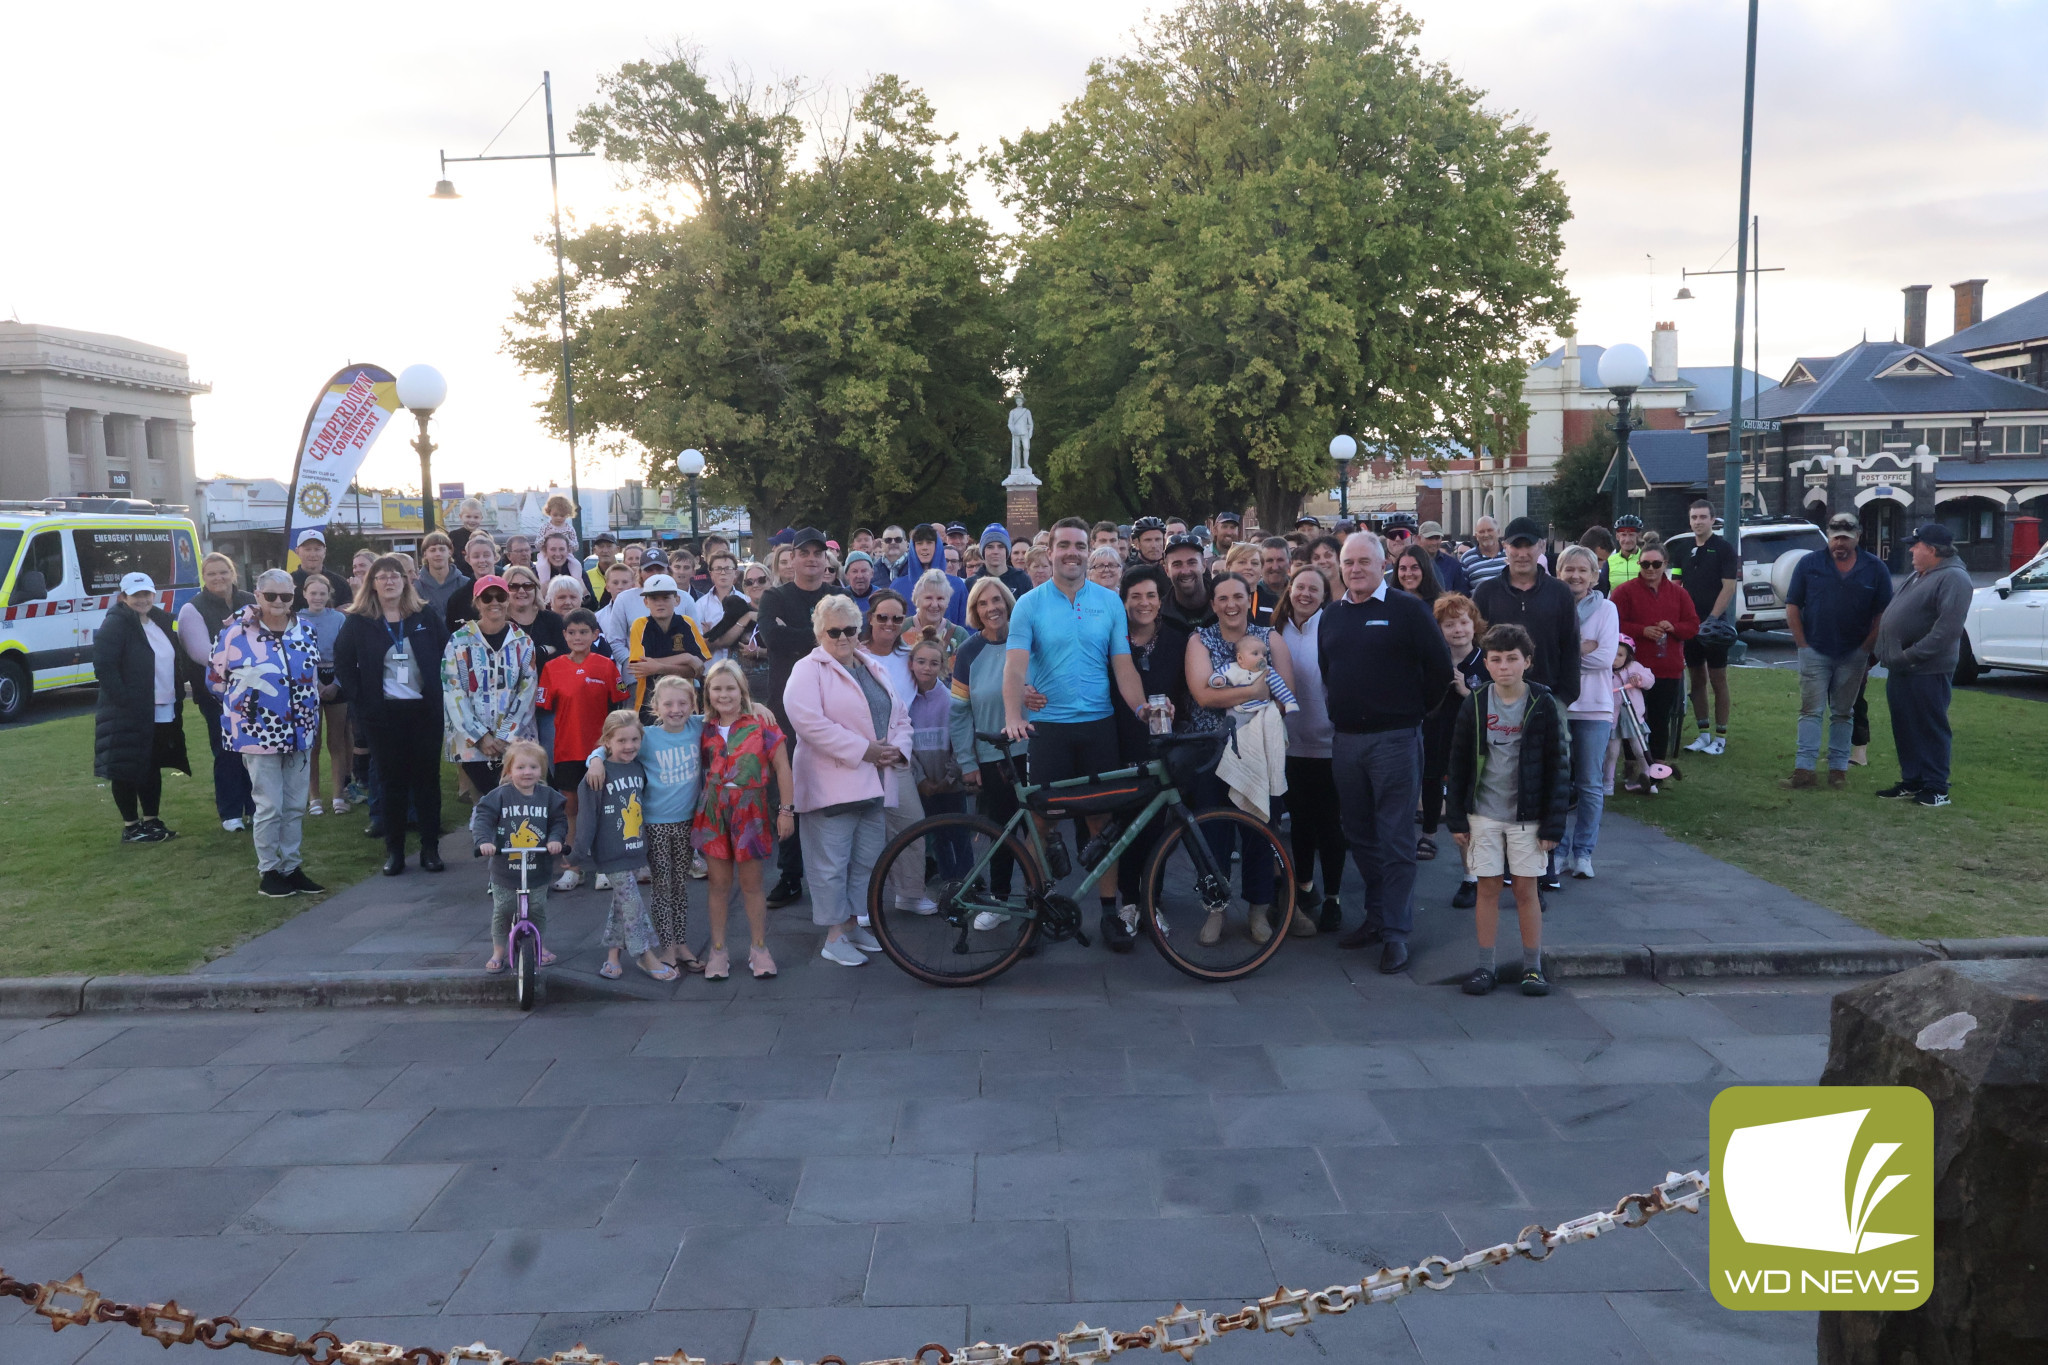 Welcome home: Residents gathered around the Camperdown Clocktower to welcome Jake Rowbottom back to his hometown as he completed his bike ride on Friday.